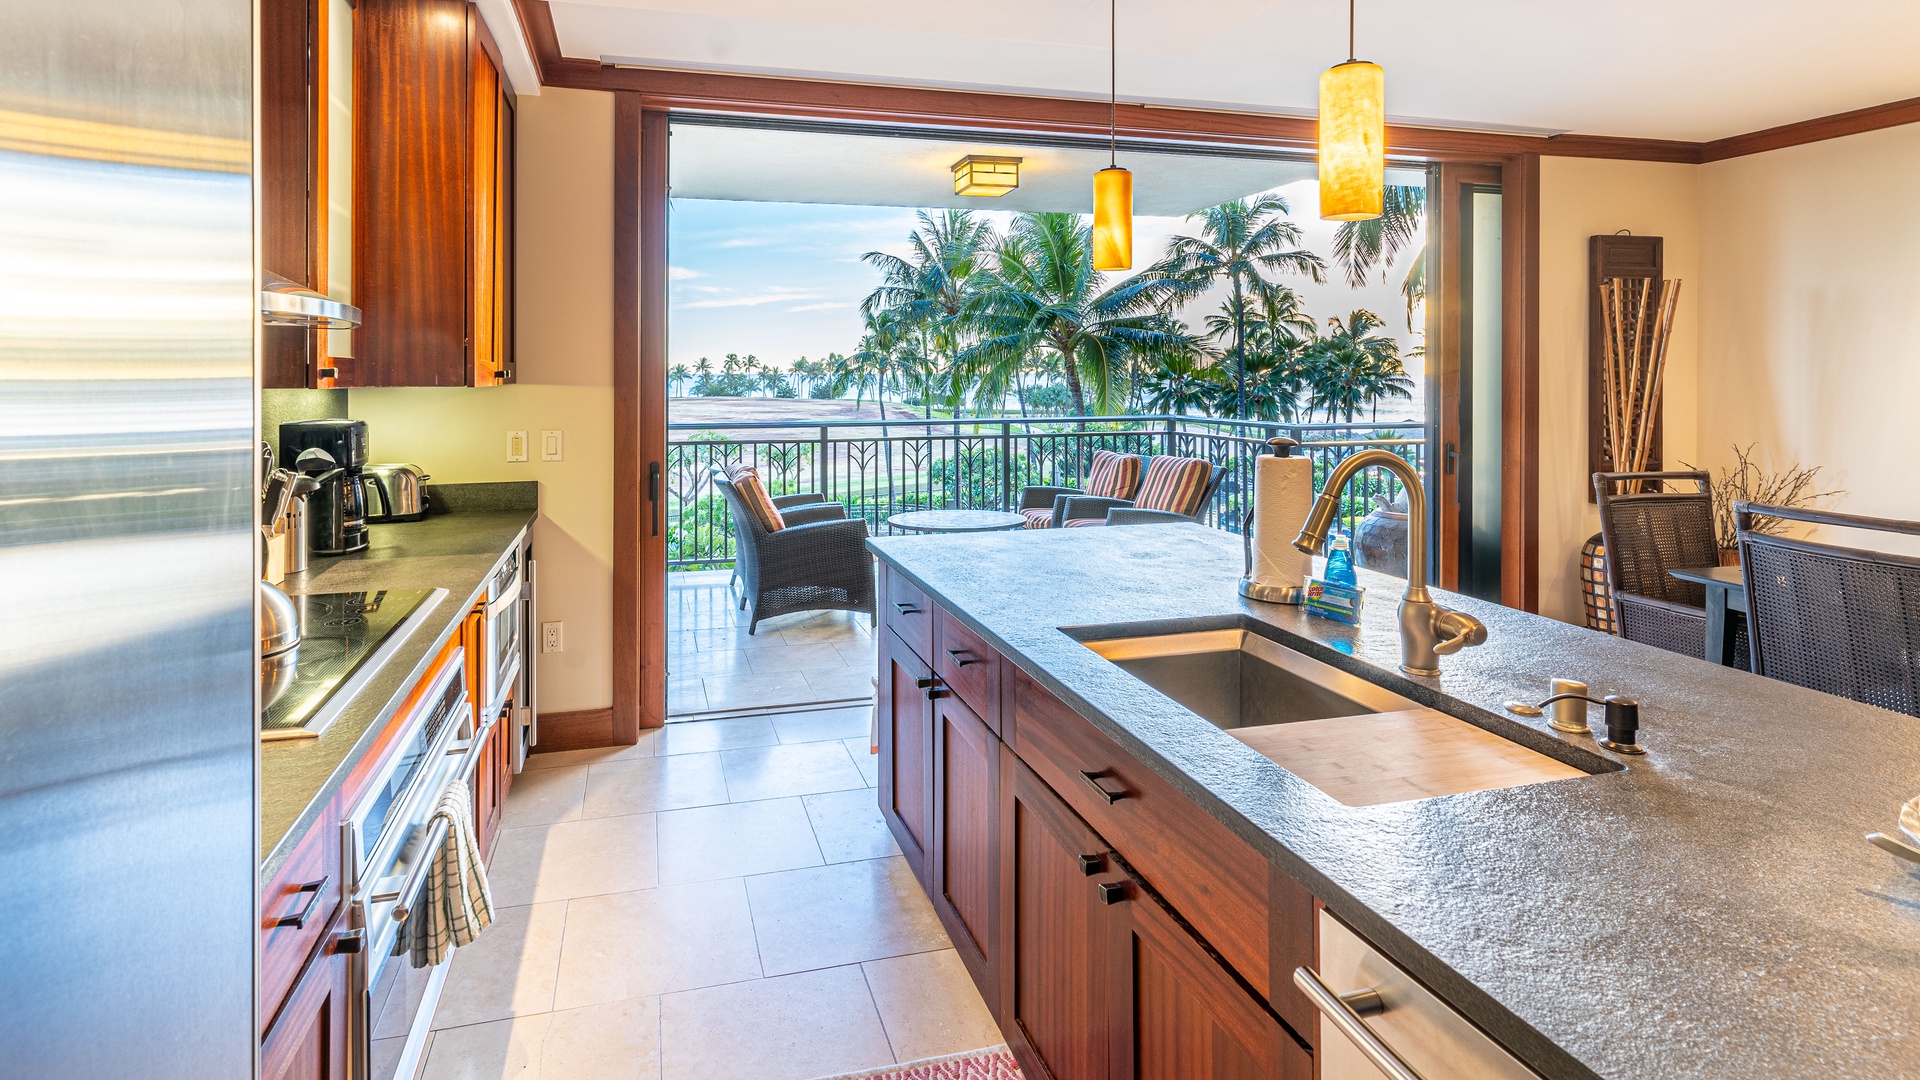 Kapolei Vacation Rentals, Ko Olina Beach Villas B301 - The best view a chef could dream of from the kitchen.